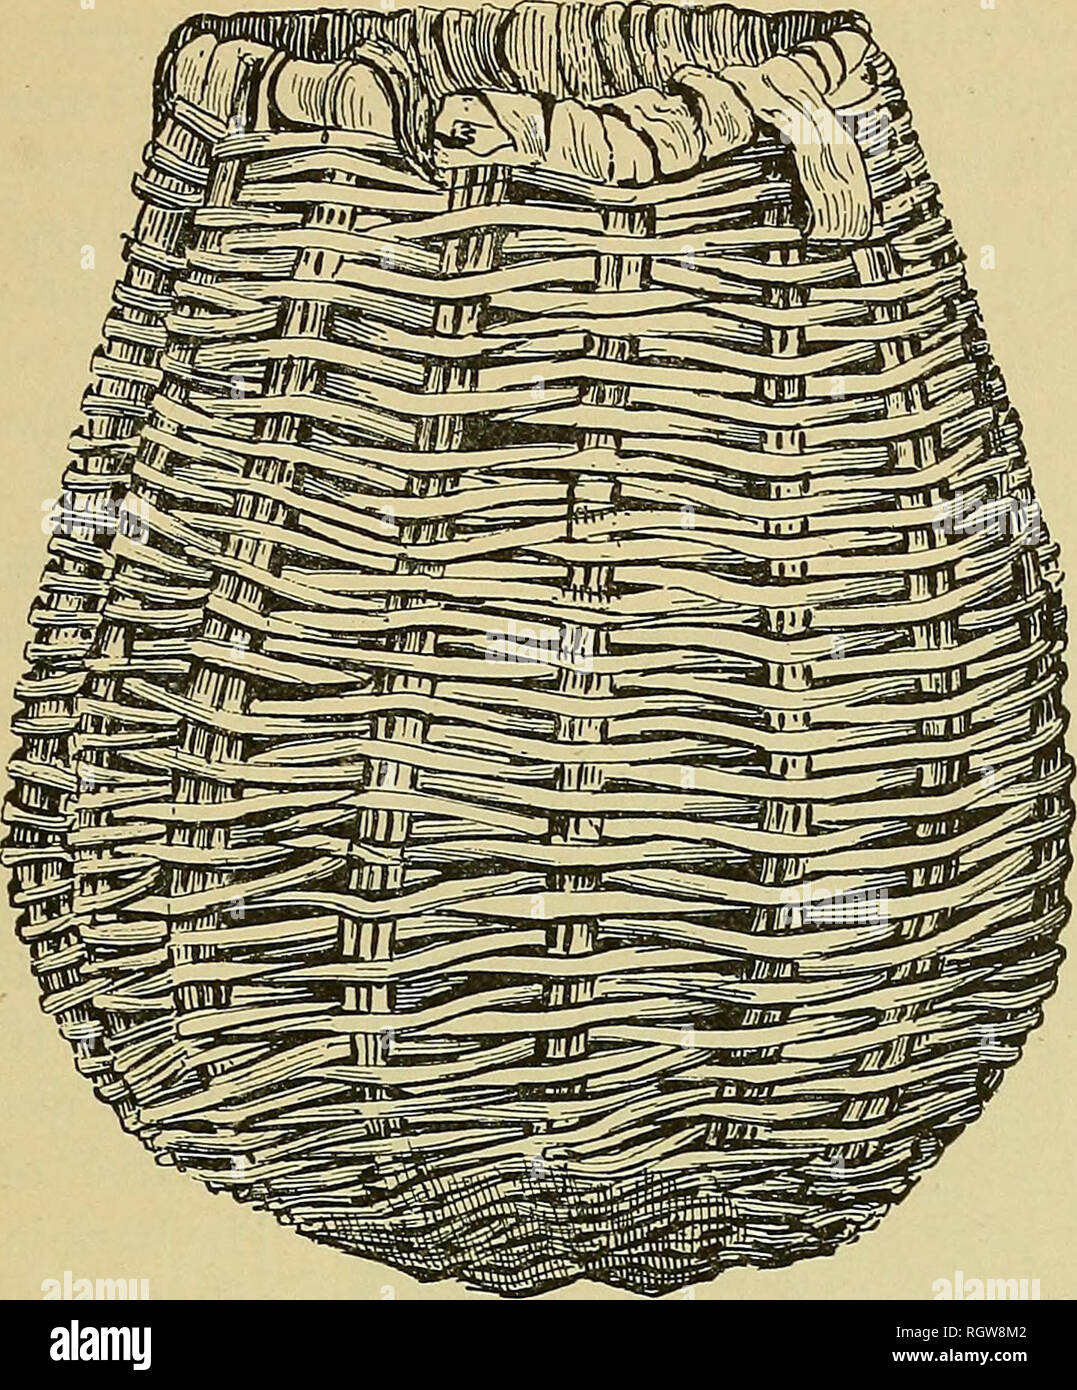 . Bulletin - United States National Museum. Science. [9] BULLETIN 39, UNITED STATES NATIONAL MUSEUM. of ridges. It is possible also to produce diagonal effects in this type of weavino-.. Fig. 10. wicker basket of the zunt. Kept. U.S.N.M., 1884, pi. 48. flg. 8ii. Wickerwork must have been a ver}'^ earlj^ and primitive lorm of textile. Weirs for stopping fish are made of brush, and wattled fences for game drives are set up in the same manner. A great deal of the coarse basketry in use for pack- ing and transporting is made in this fashion. The Zuni Indians make gathering baskets of little twigs  Stock Photo